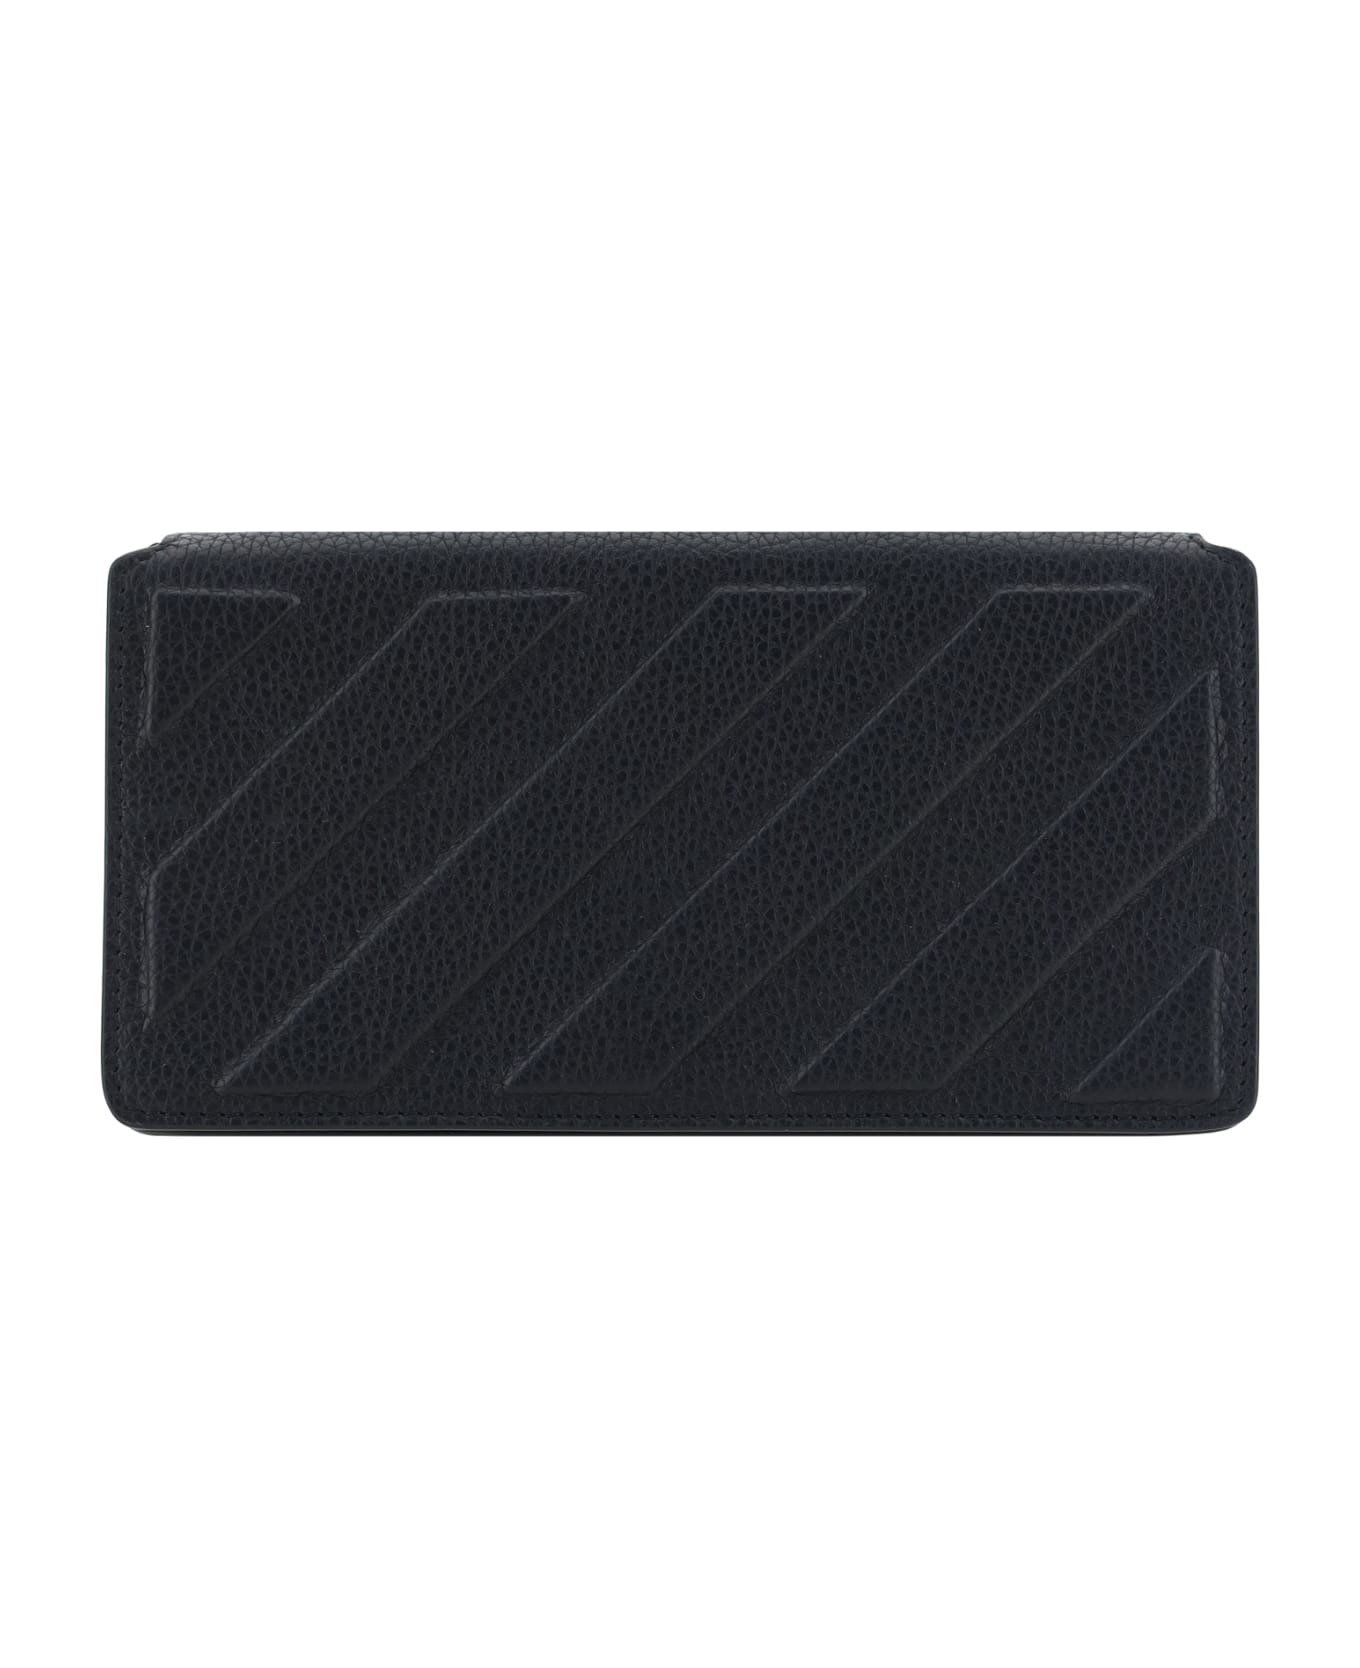 Off-White Pebbled Leather Clutch - Black No C